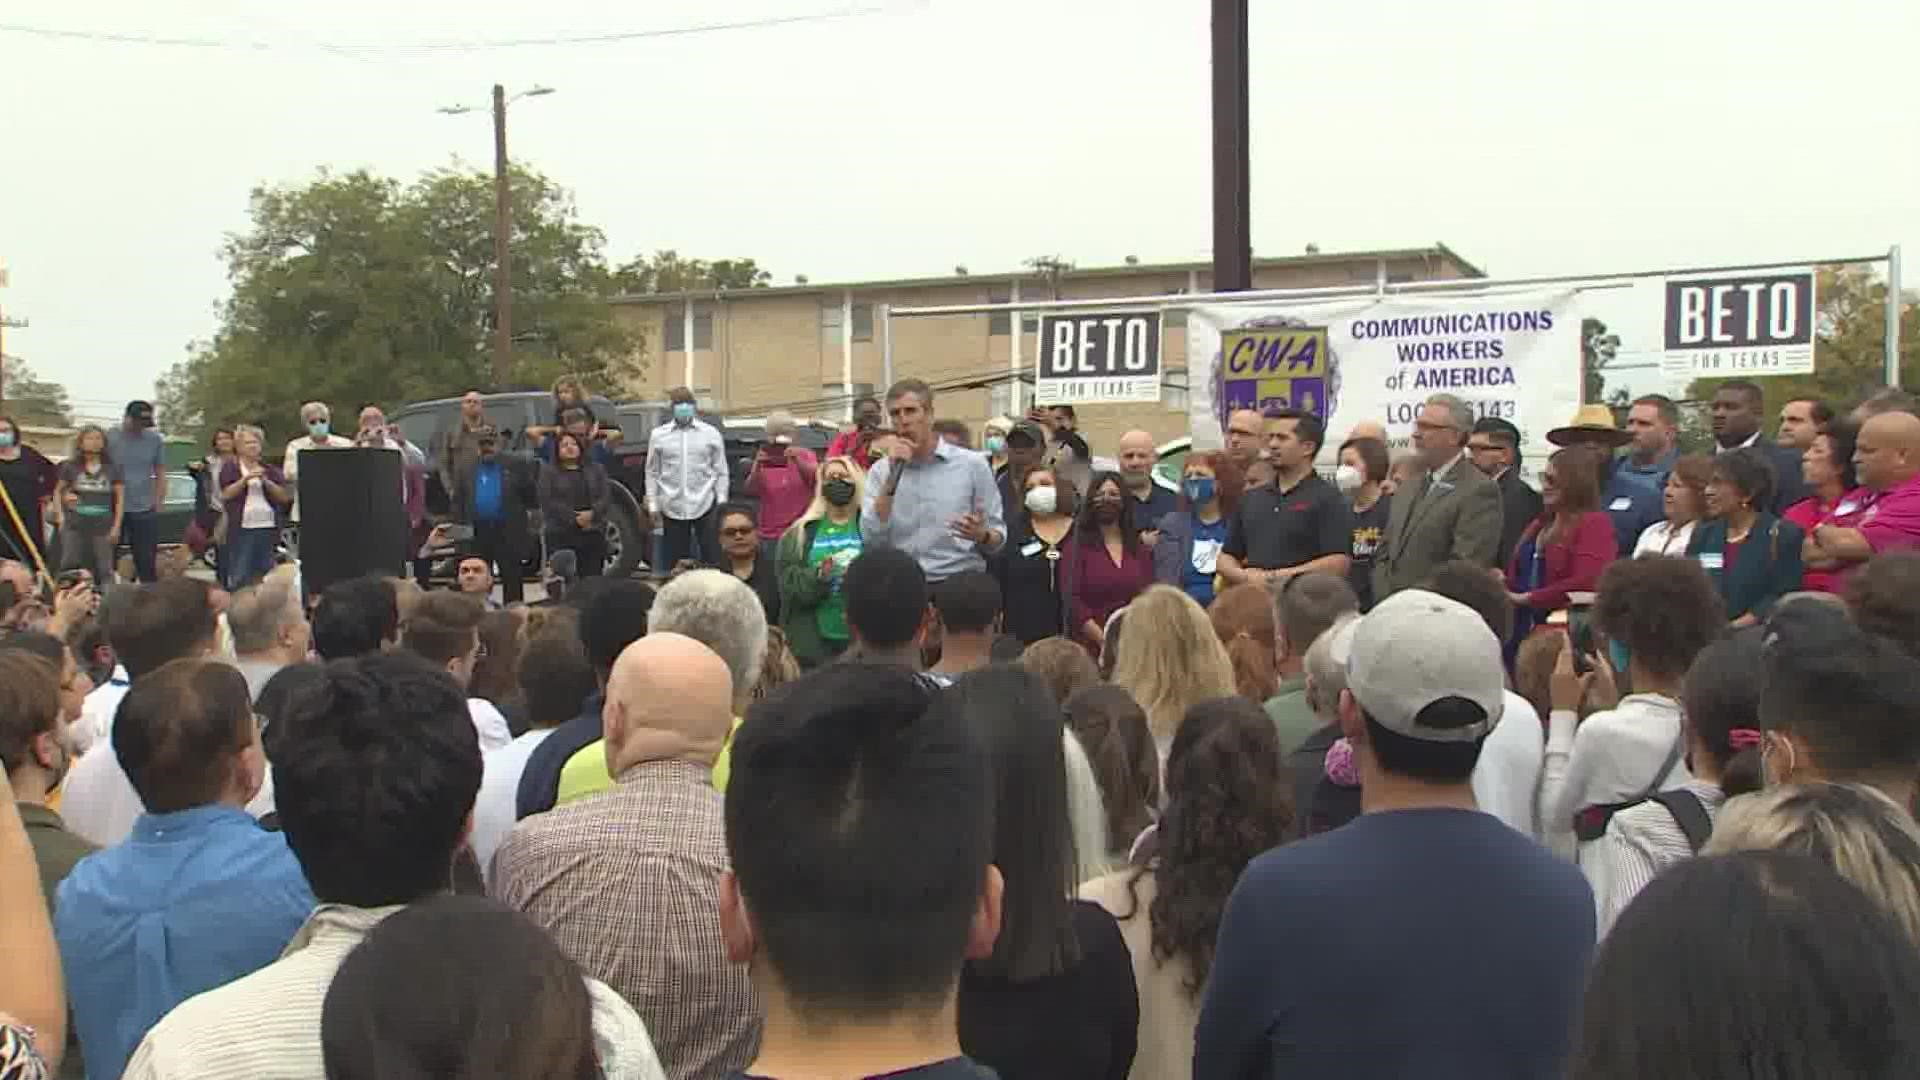 Texas’ newest gubernatorial candidate, Beto O’Rourke, kicked off his campaign on Tuesday.